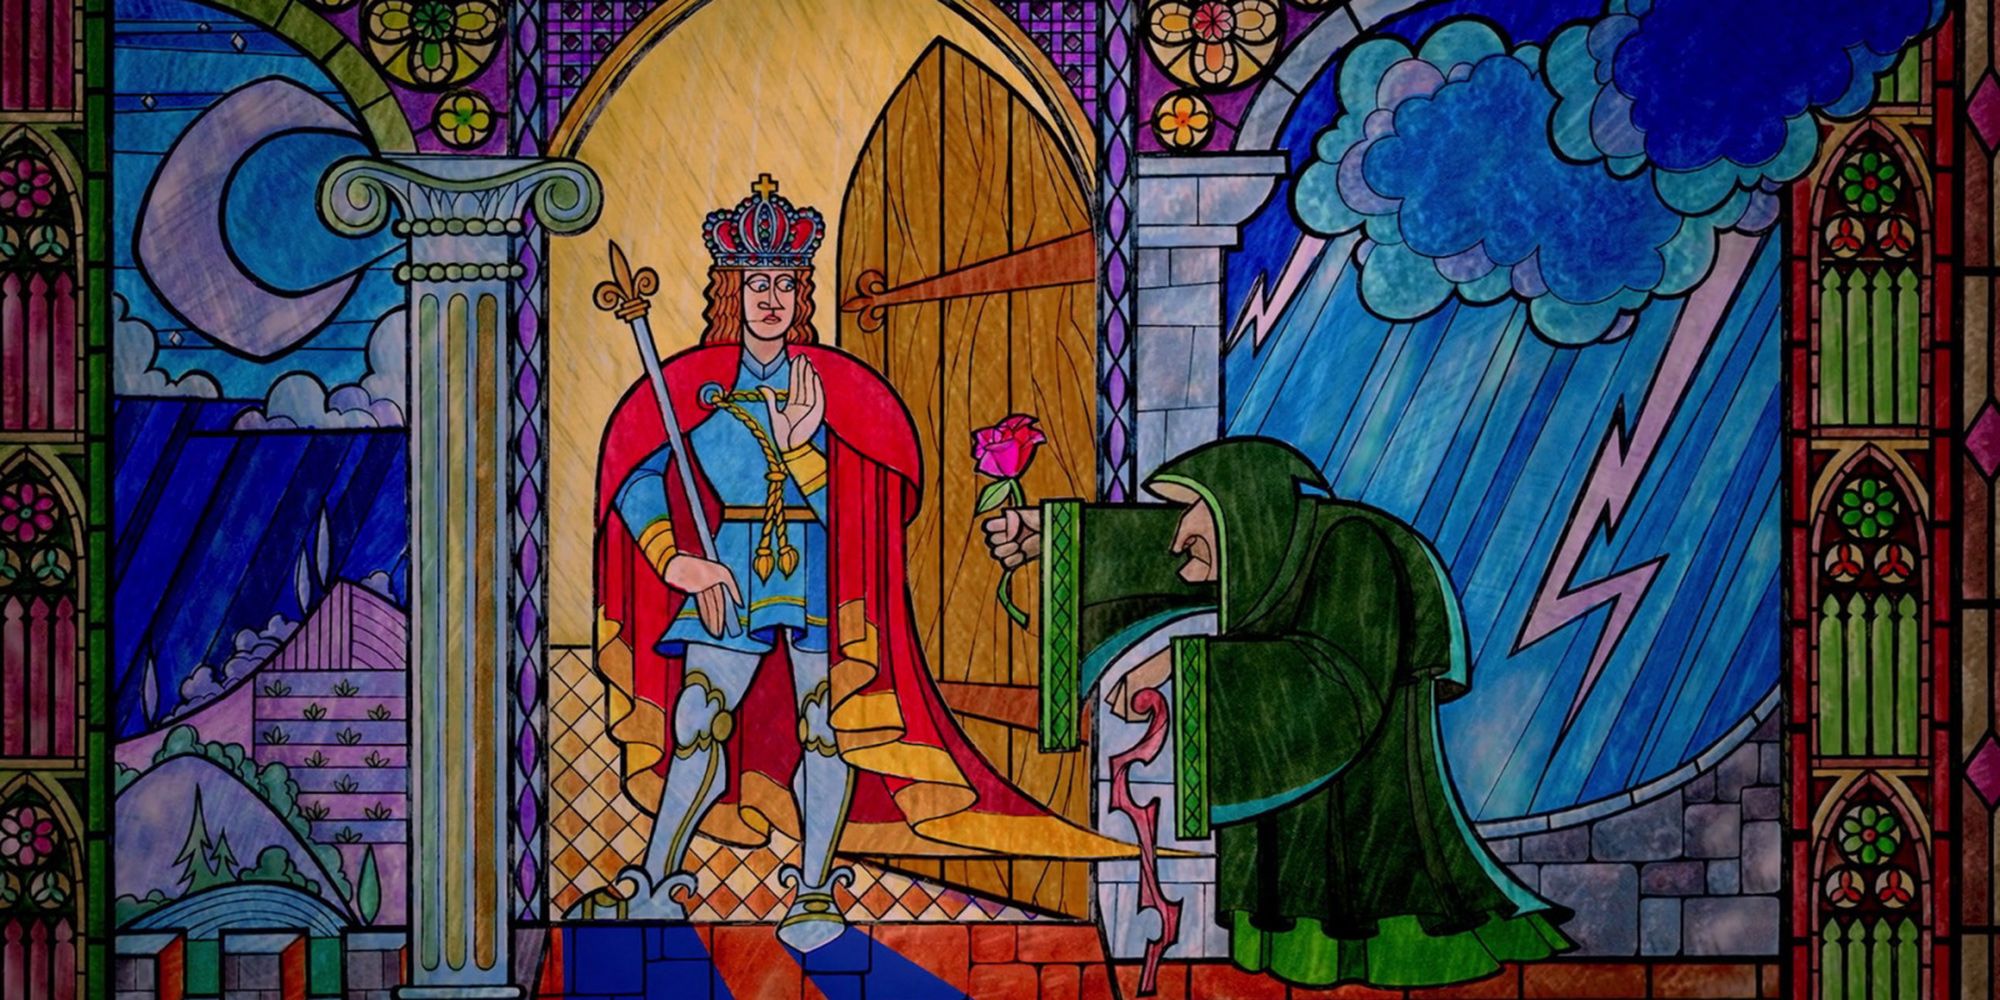 Stainglass showing the Enchantress showing up at Prince Adam's door